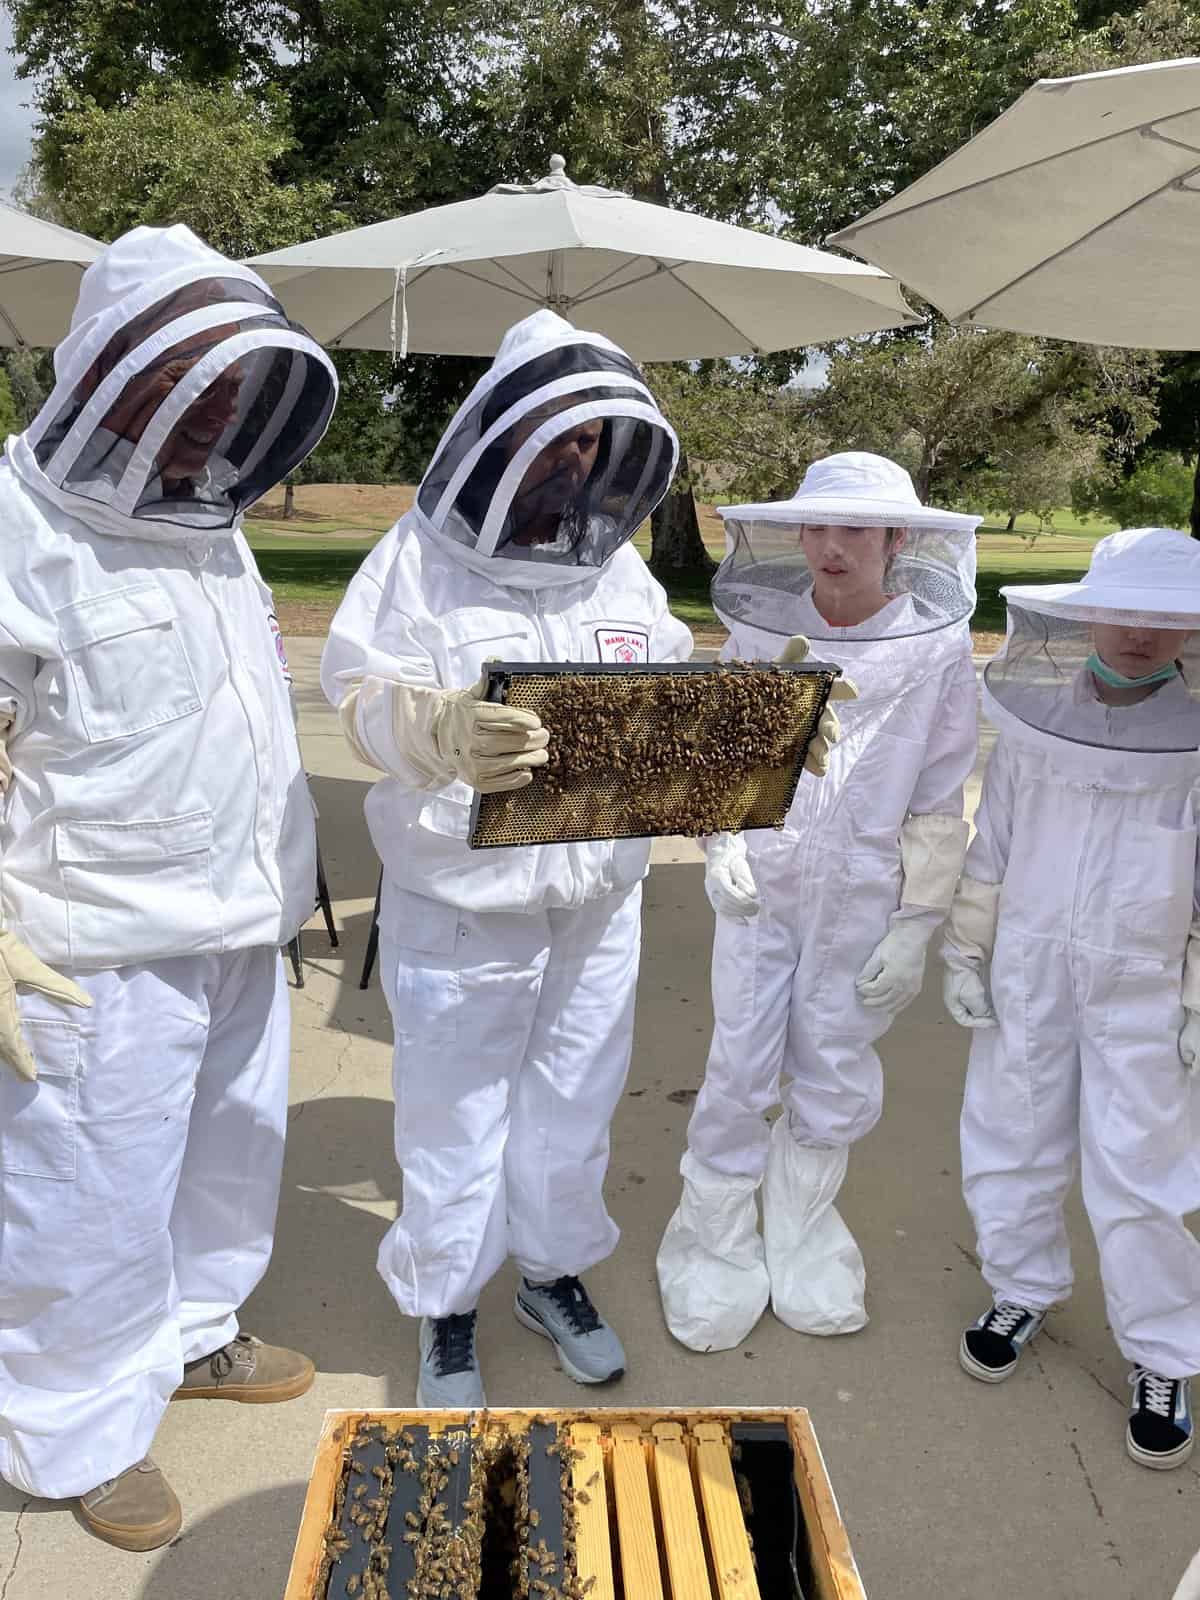 Heather holding a tray of bees